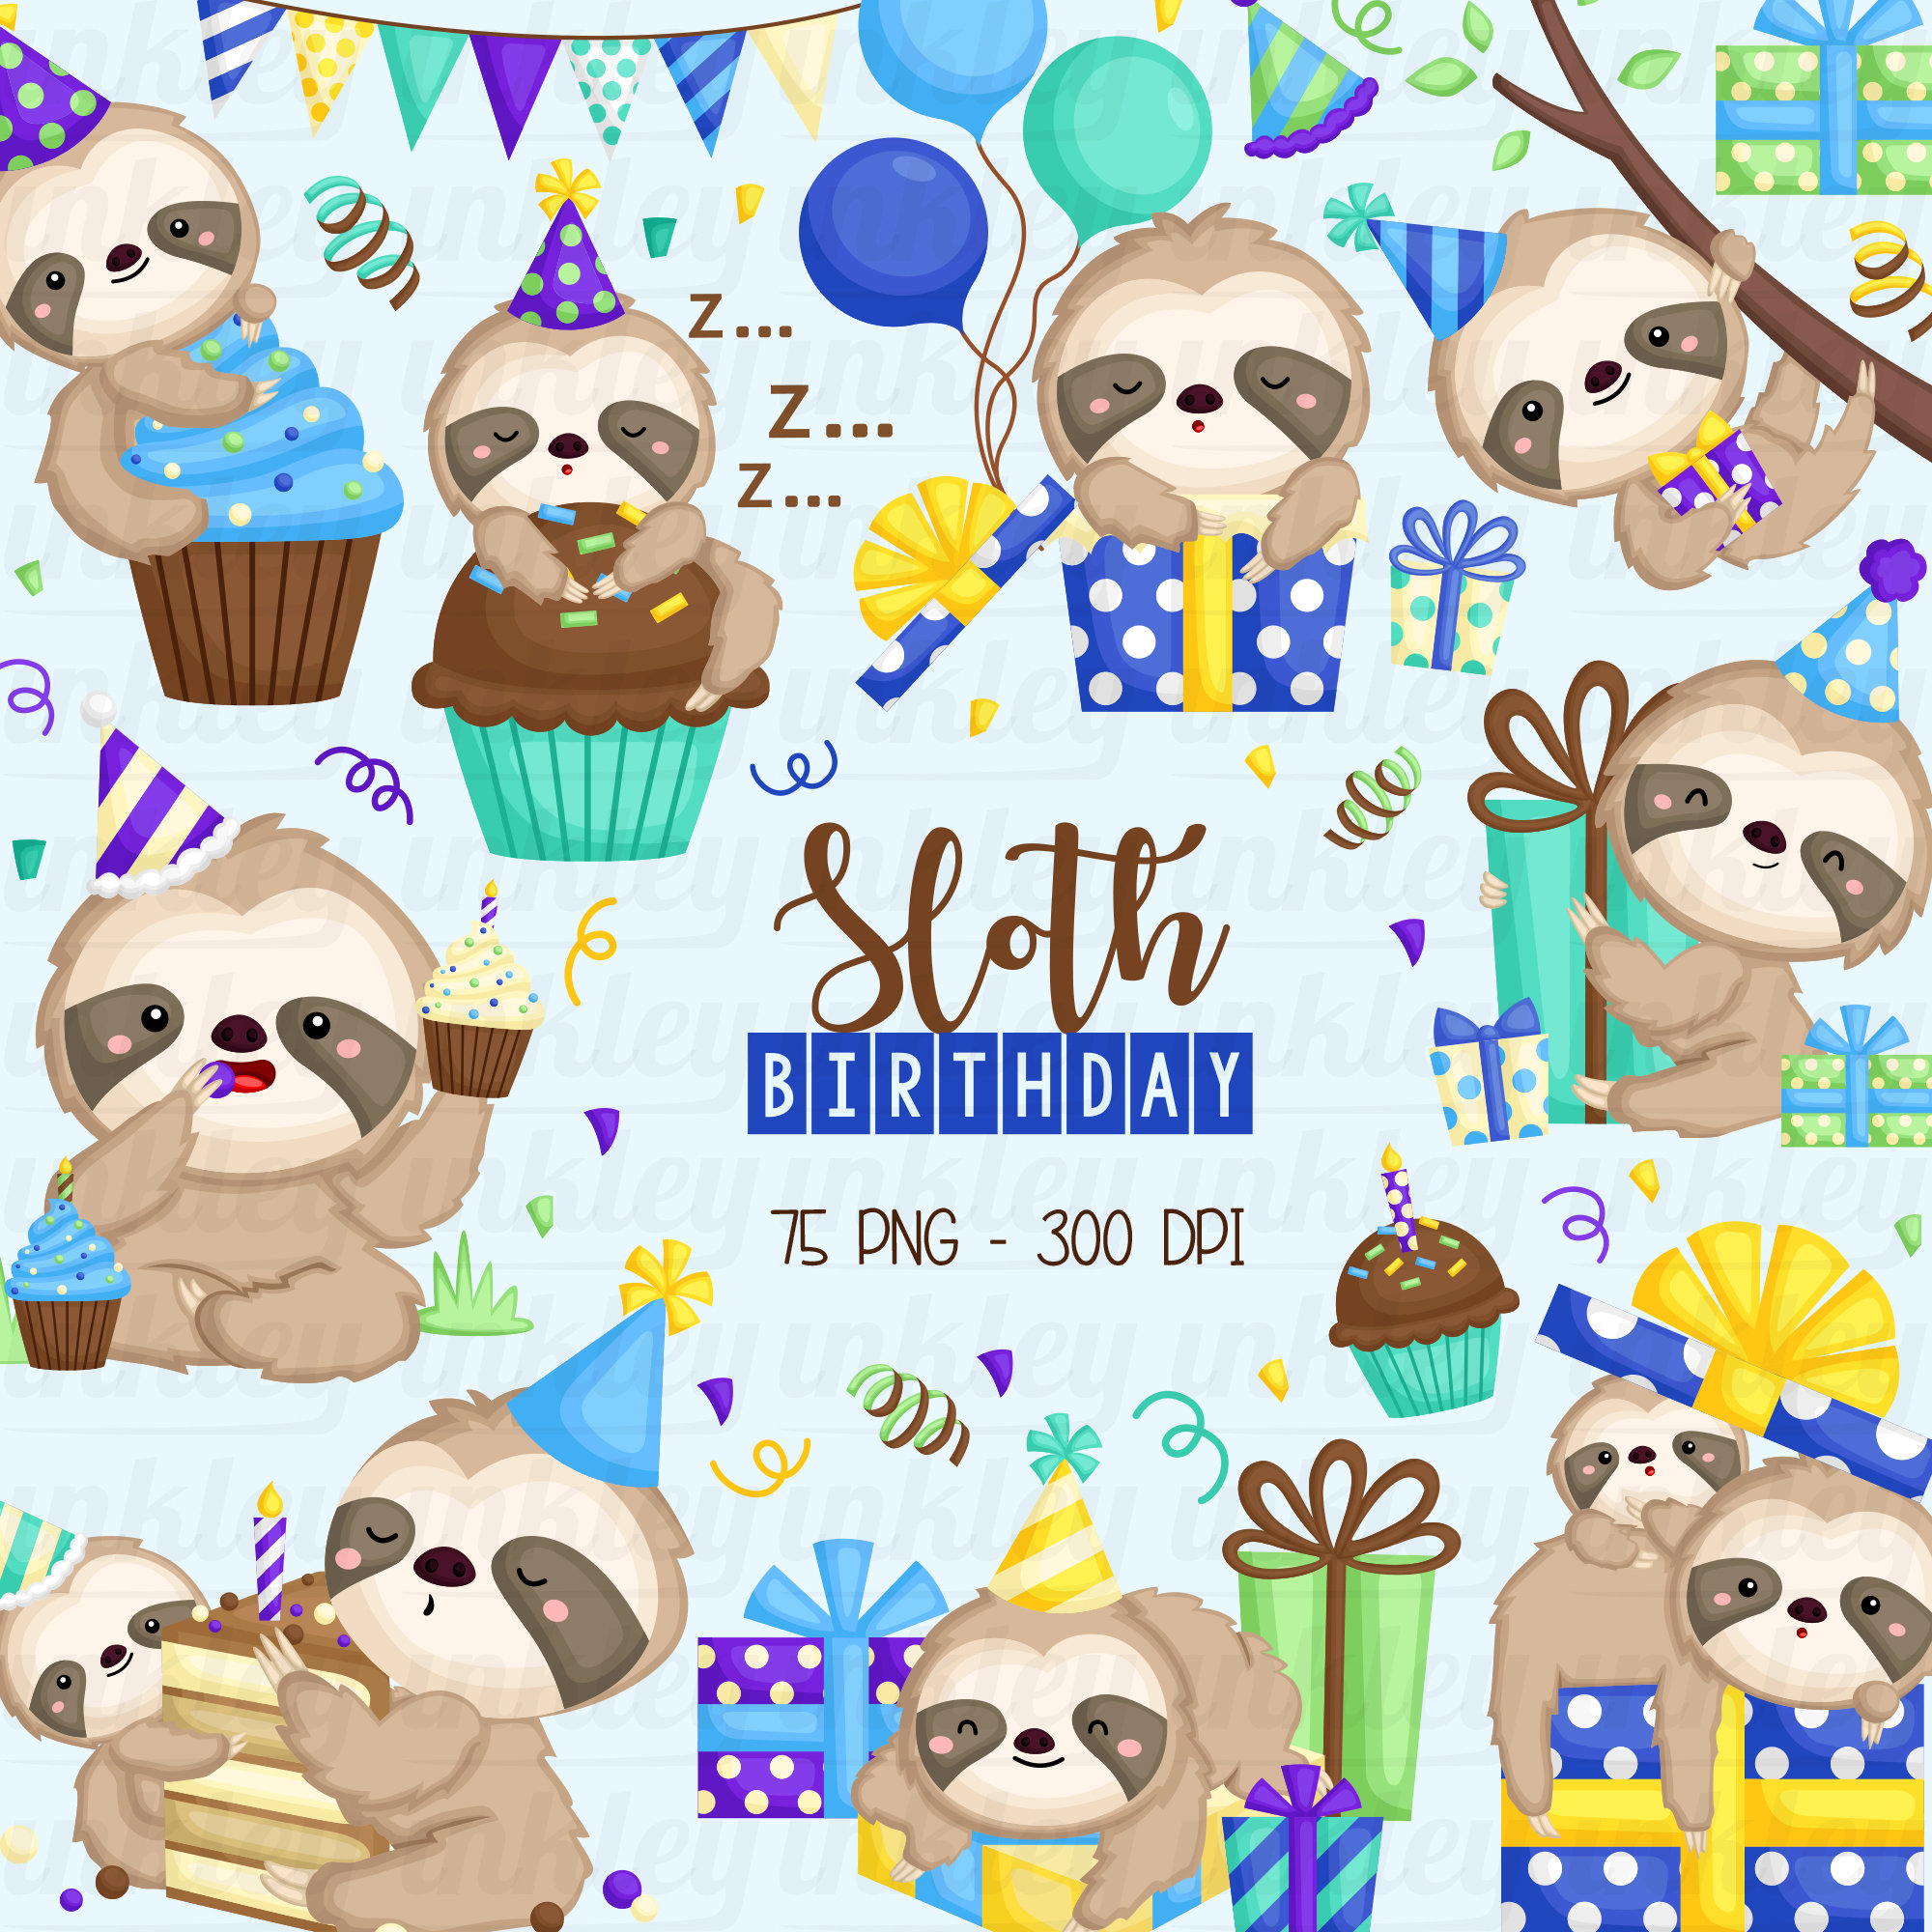 Download Birthday Sloth Clipart Cute Sloth Clip Art Birthday Party Clipart Free Svg On Request